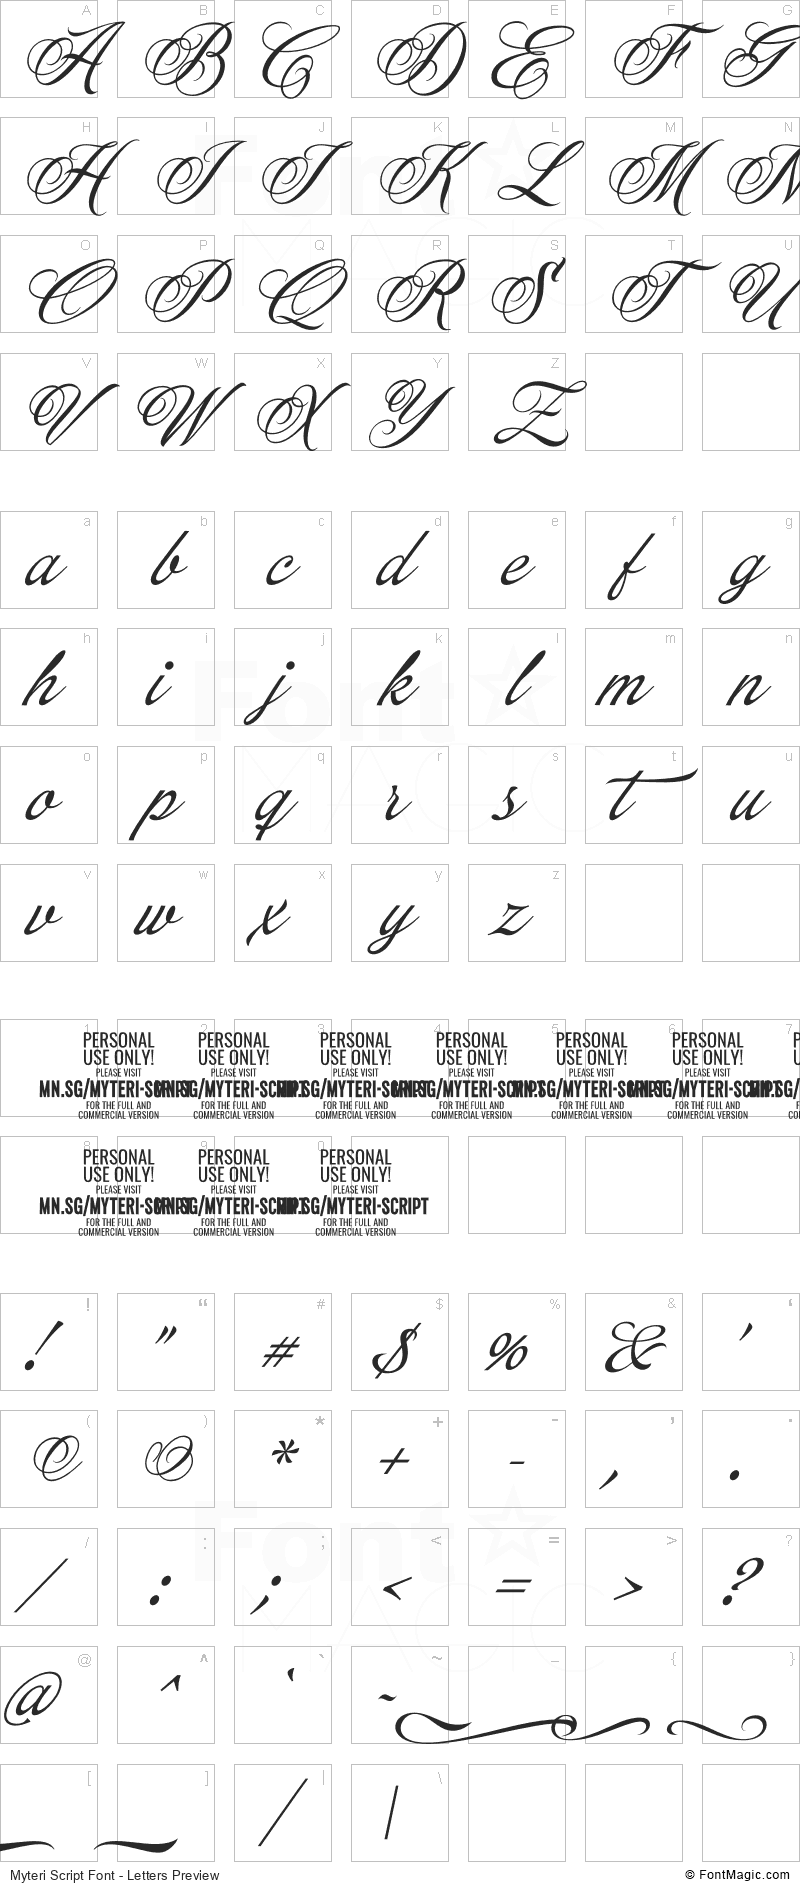 Myteri Script Font - All Latters Preview Chart